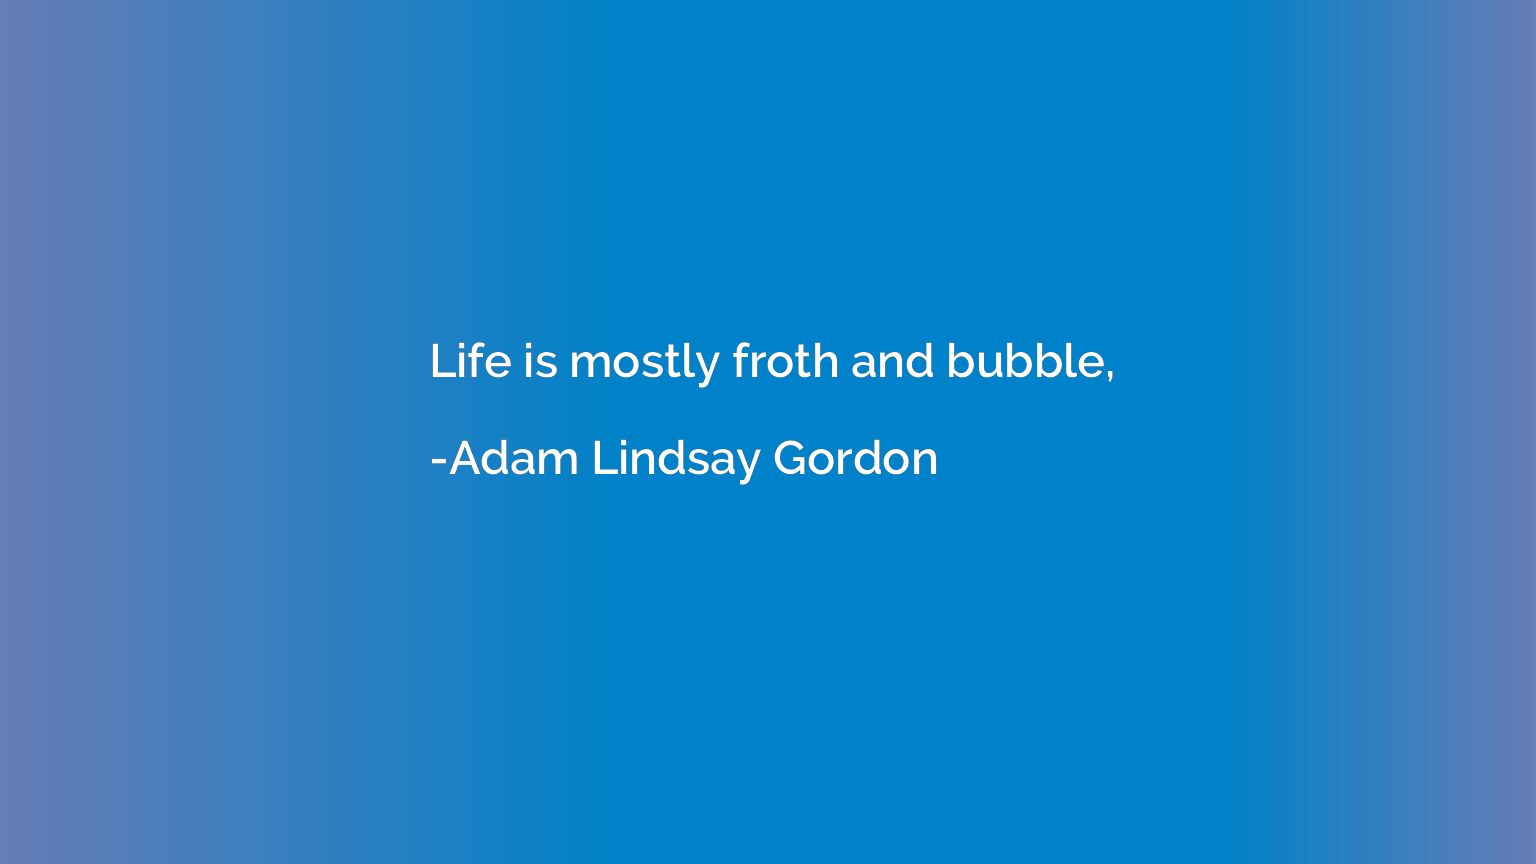 Life is mostly froth and bubble,